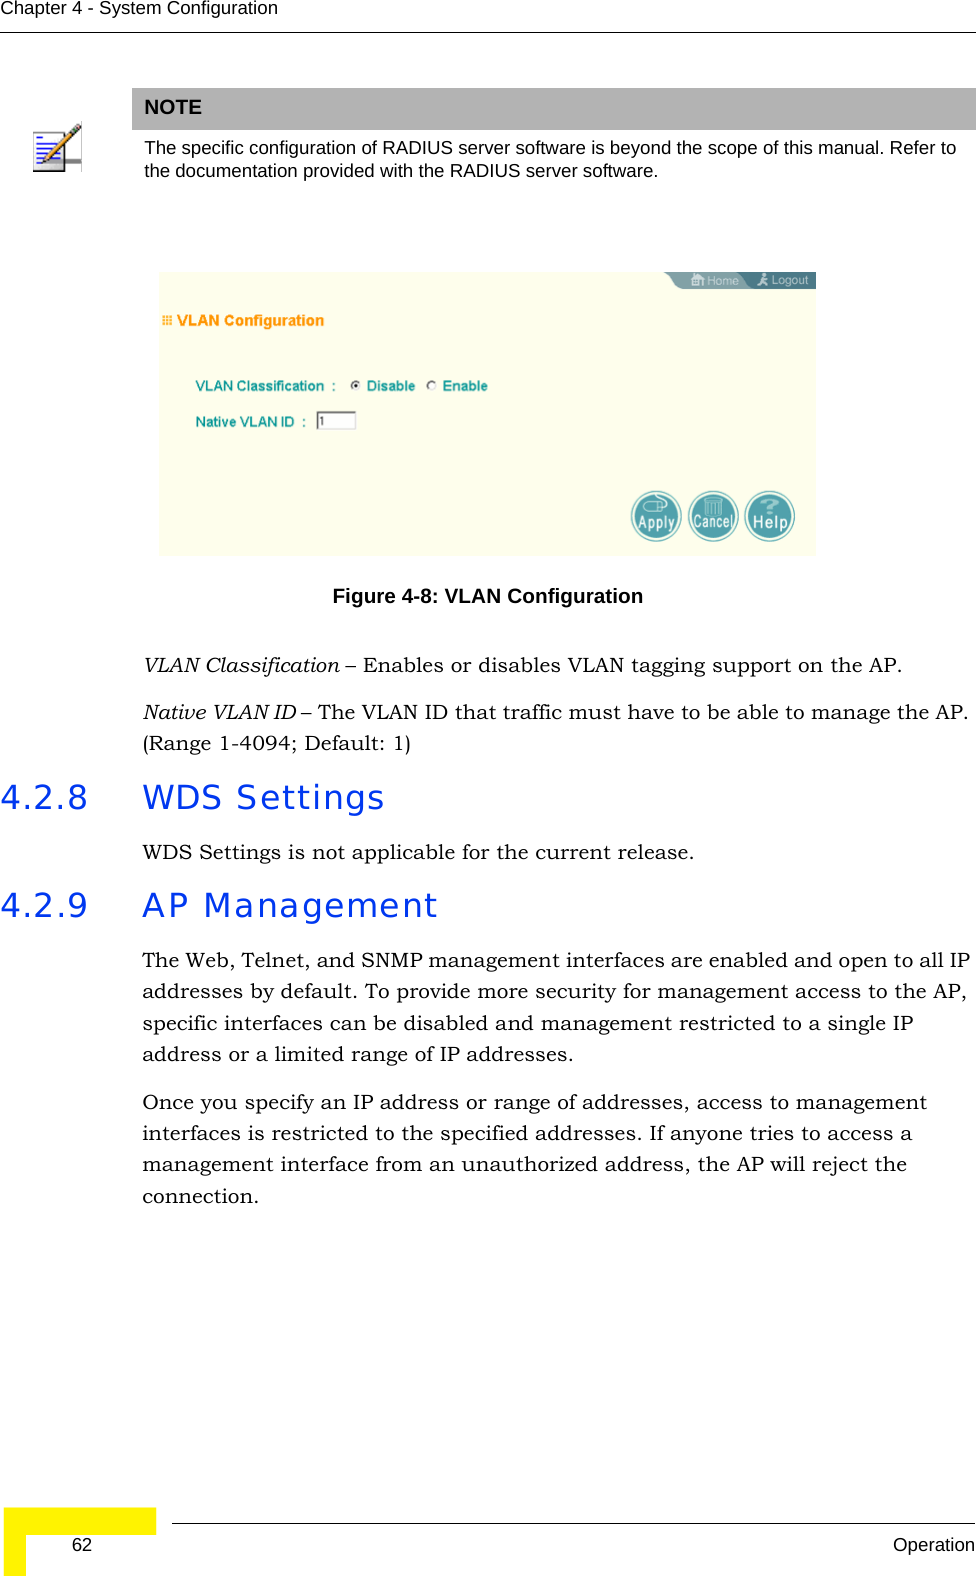  62 OperationChapter 4 - System ConfigurationVLAN Classification – Enables or disables VLAN tagging support on the AP.Native VLAN ID – The VLAN ID that traffic must have to be able to manage the AP. (Range 1-4094; Default: 1)4.2.8 WDS Settings WDS Settings is not applicable for the current release.4.2.9 AP ManagementThe Web, Telnet, and SNMP management interfaces are enabled and open to all IP addresses by default. To provide more security for management access to the AP, specific interfaces can be disabled and management restricted to a single IP address or a limited range of IP addresses.Once you specify an IP address or range of addresses, access to management interfaces is restricted to the specified addresses. If anyone tries to access a management interface from an unauthorized address, the AP will reject the connection.NOTEThe specific configuration of RADIUS server software is beyond the scope of this manual. Refer to the documentation provided with the RADIUS server software.Figure 4-8: VLAN Configuration